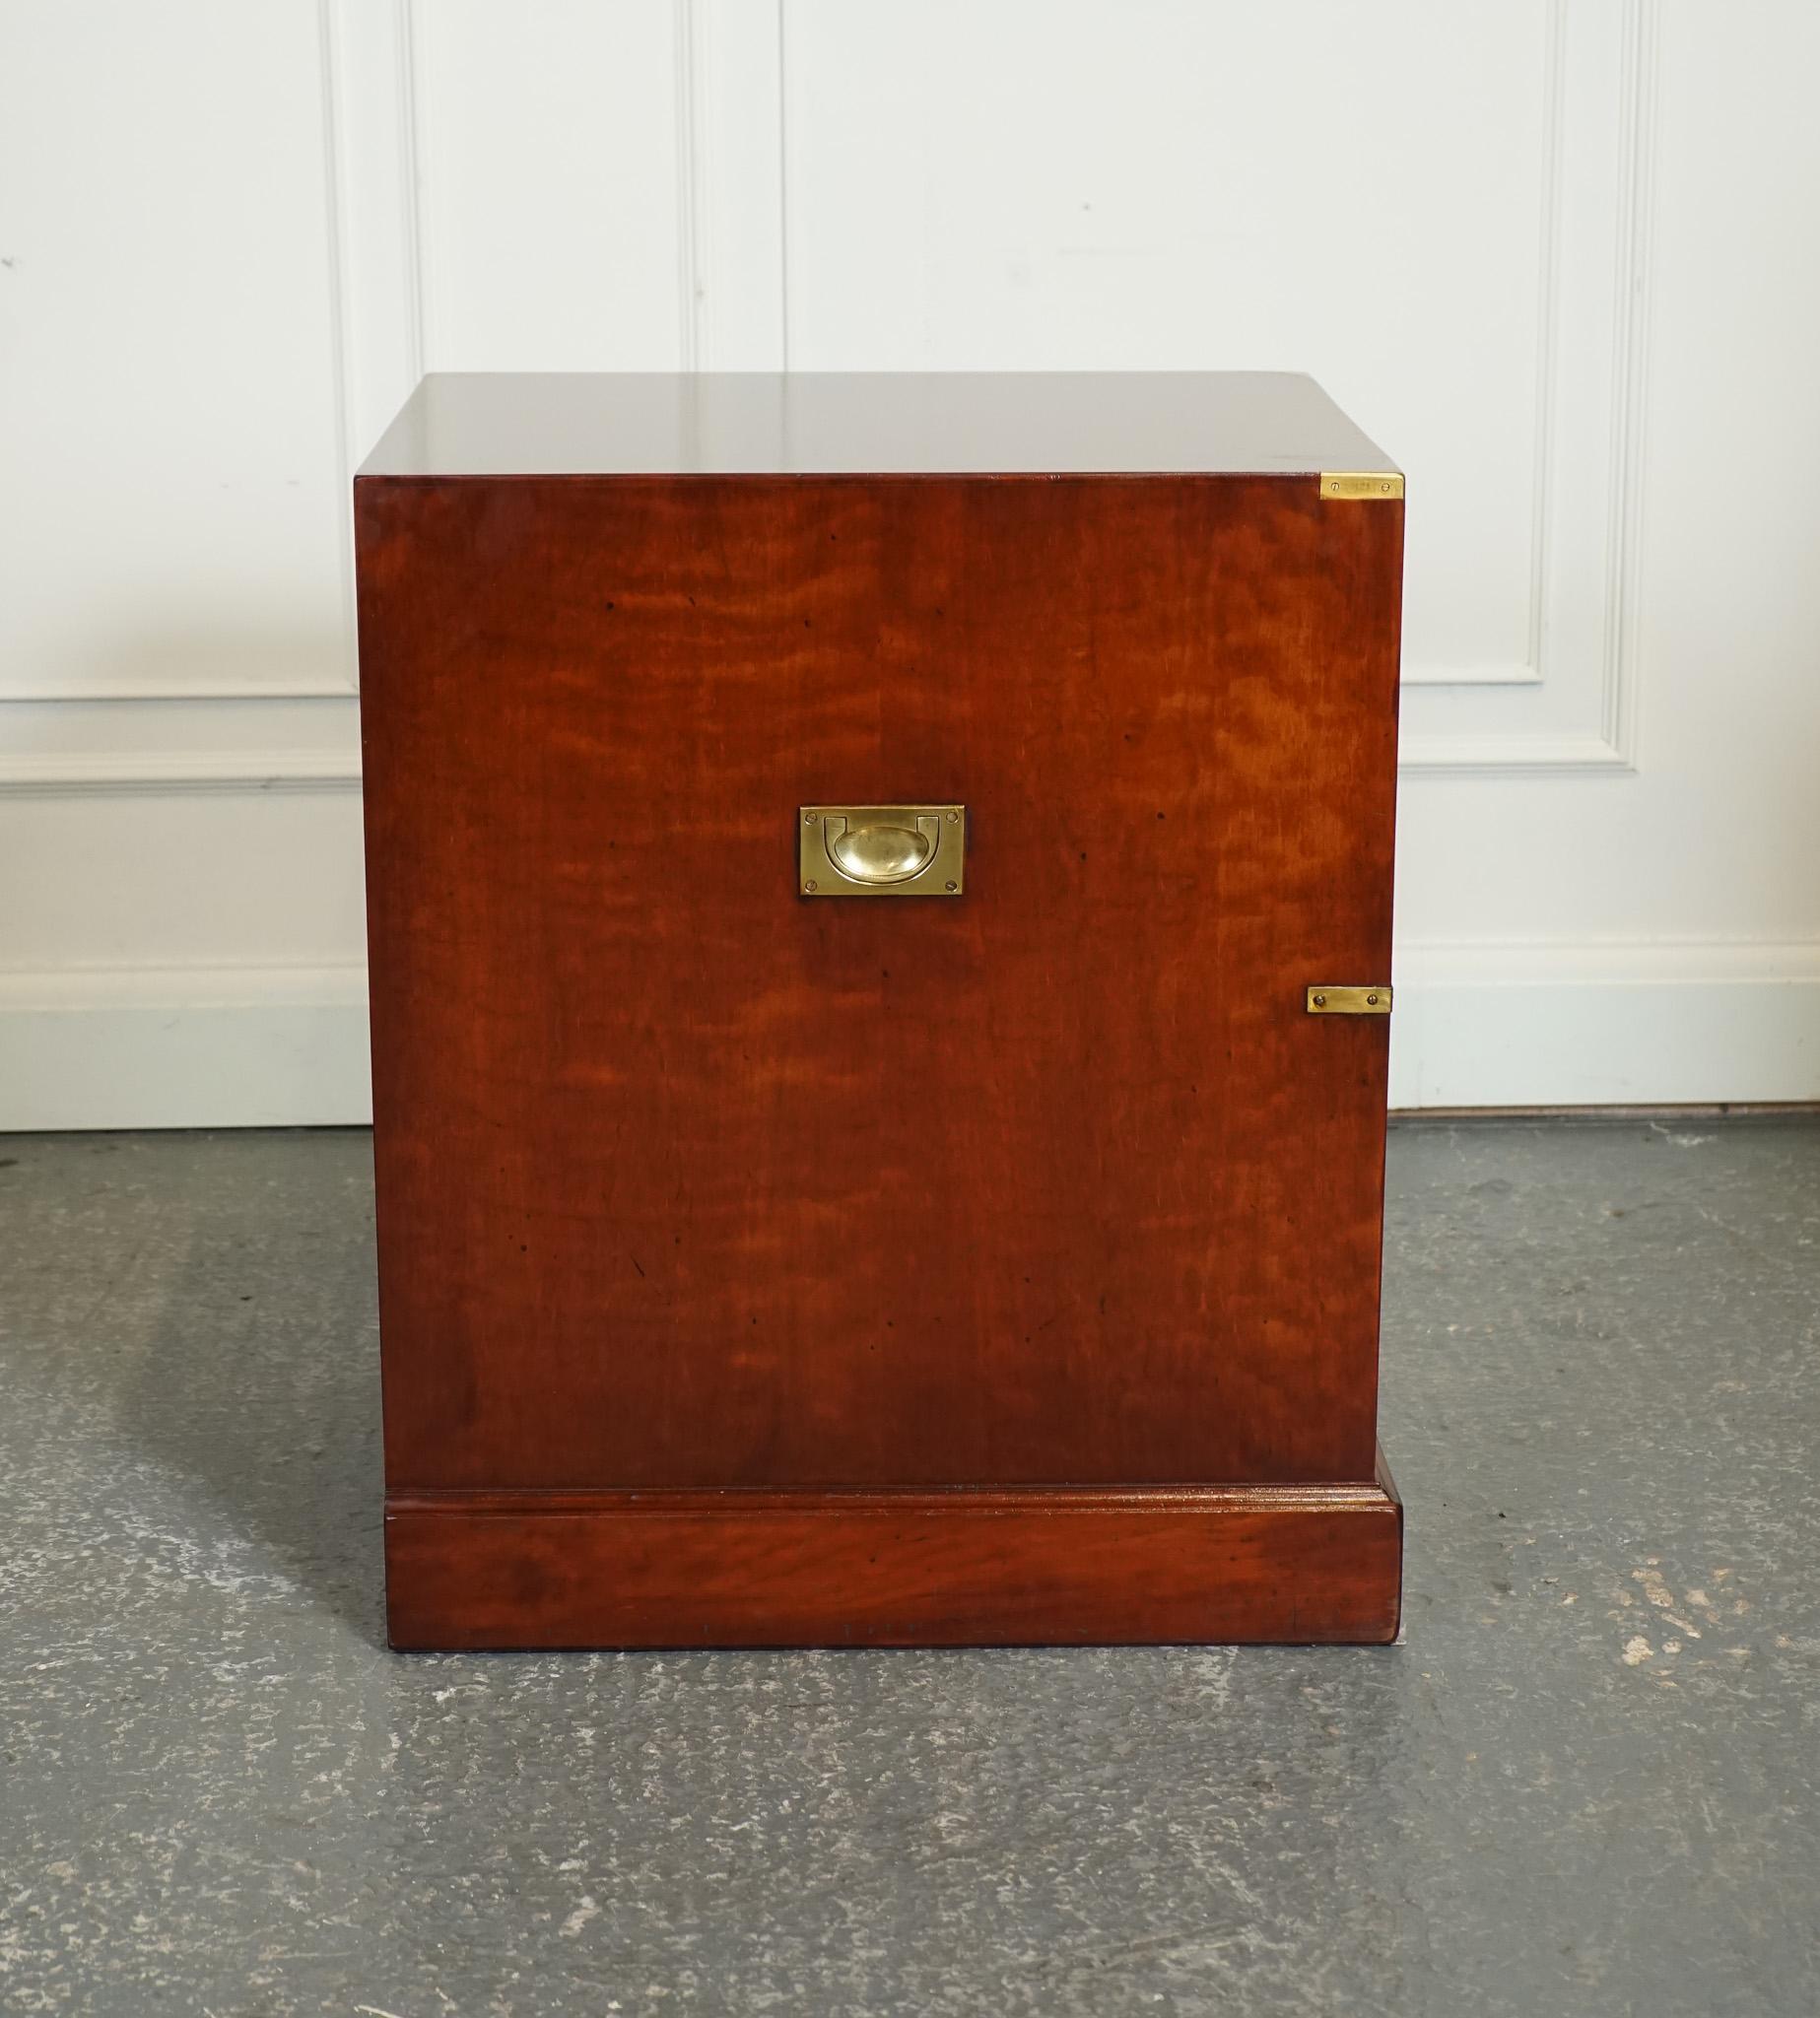 Hand-Crafted STUNNING KENNEDY HARRODS MILiTARY CAMPAIGN OFFICE DRAWERS FILLING CABINET J1